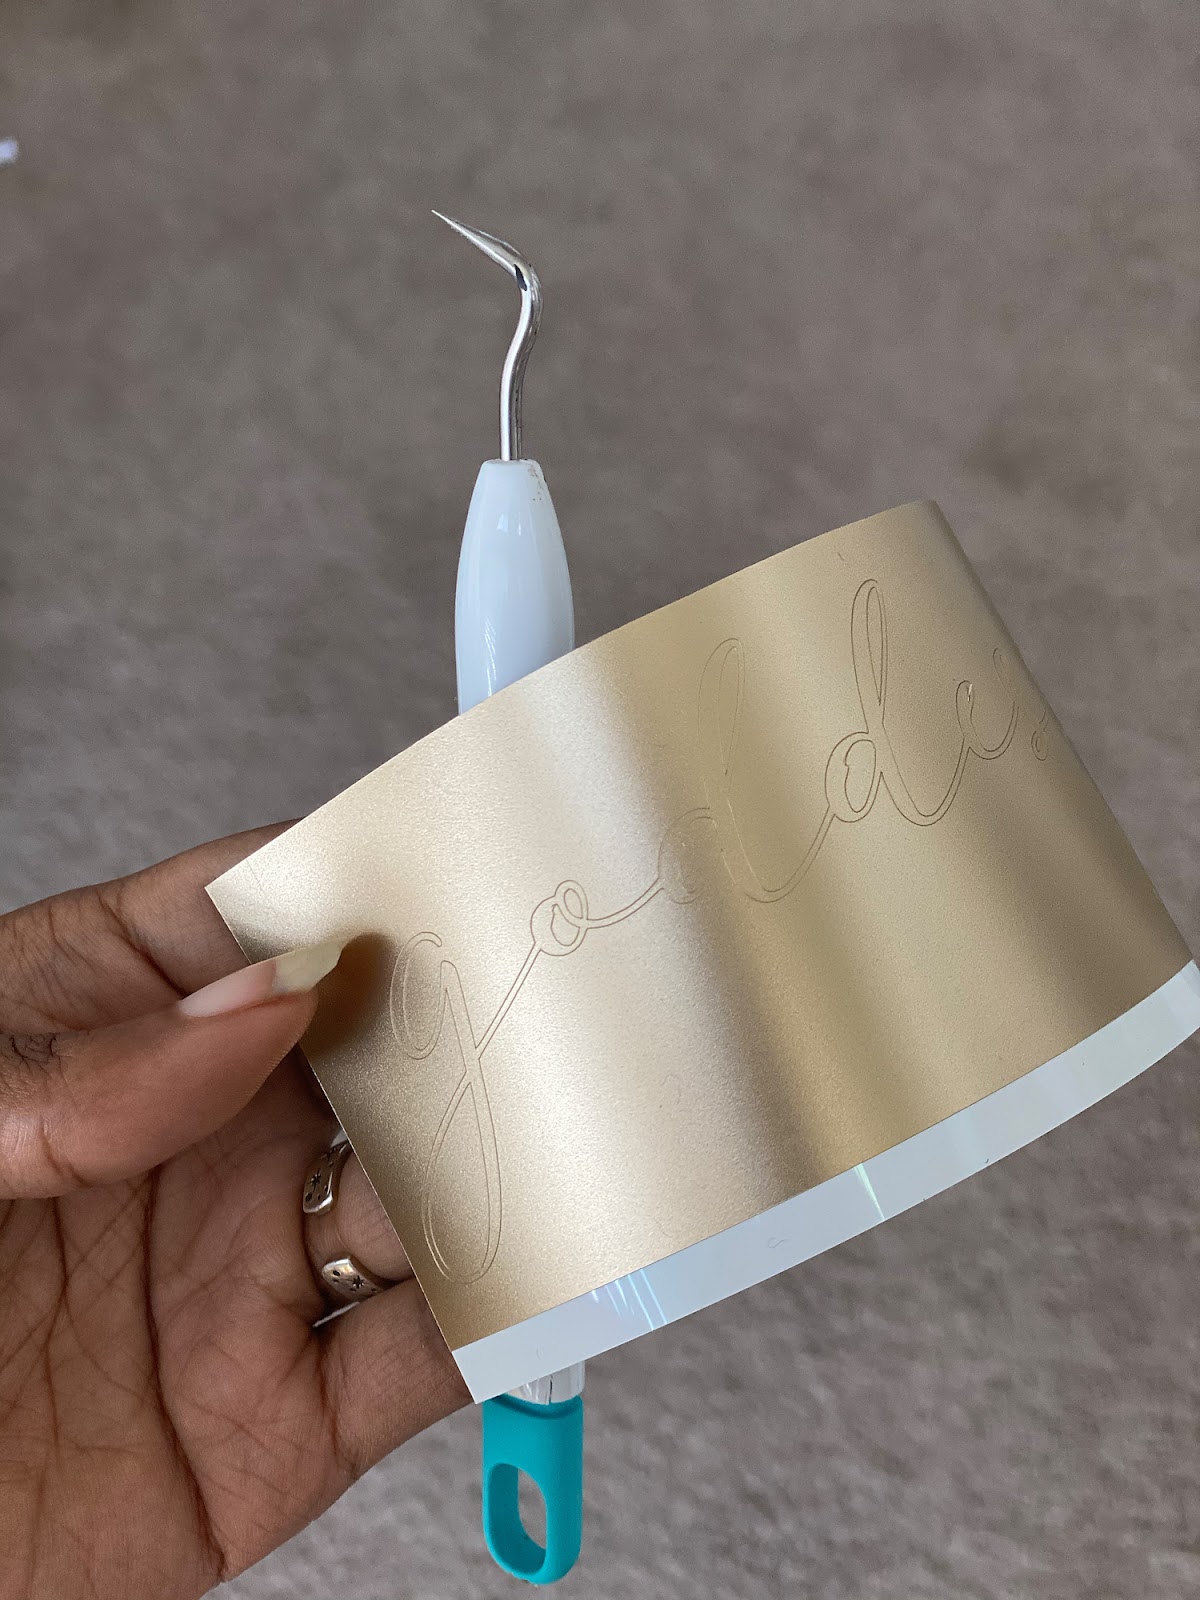 How to use a cricut joy machine for beginners.